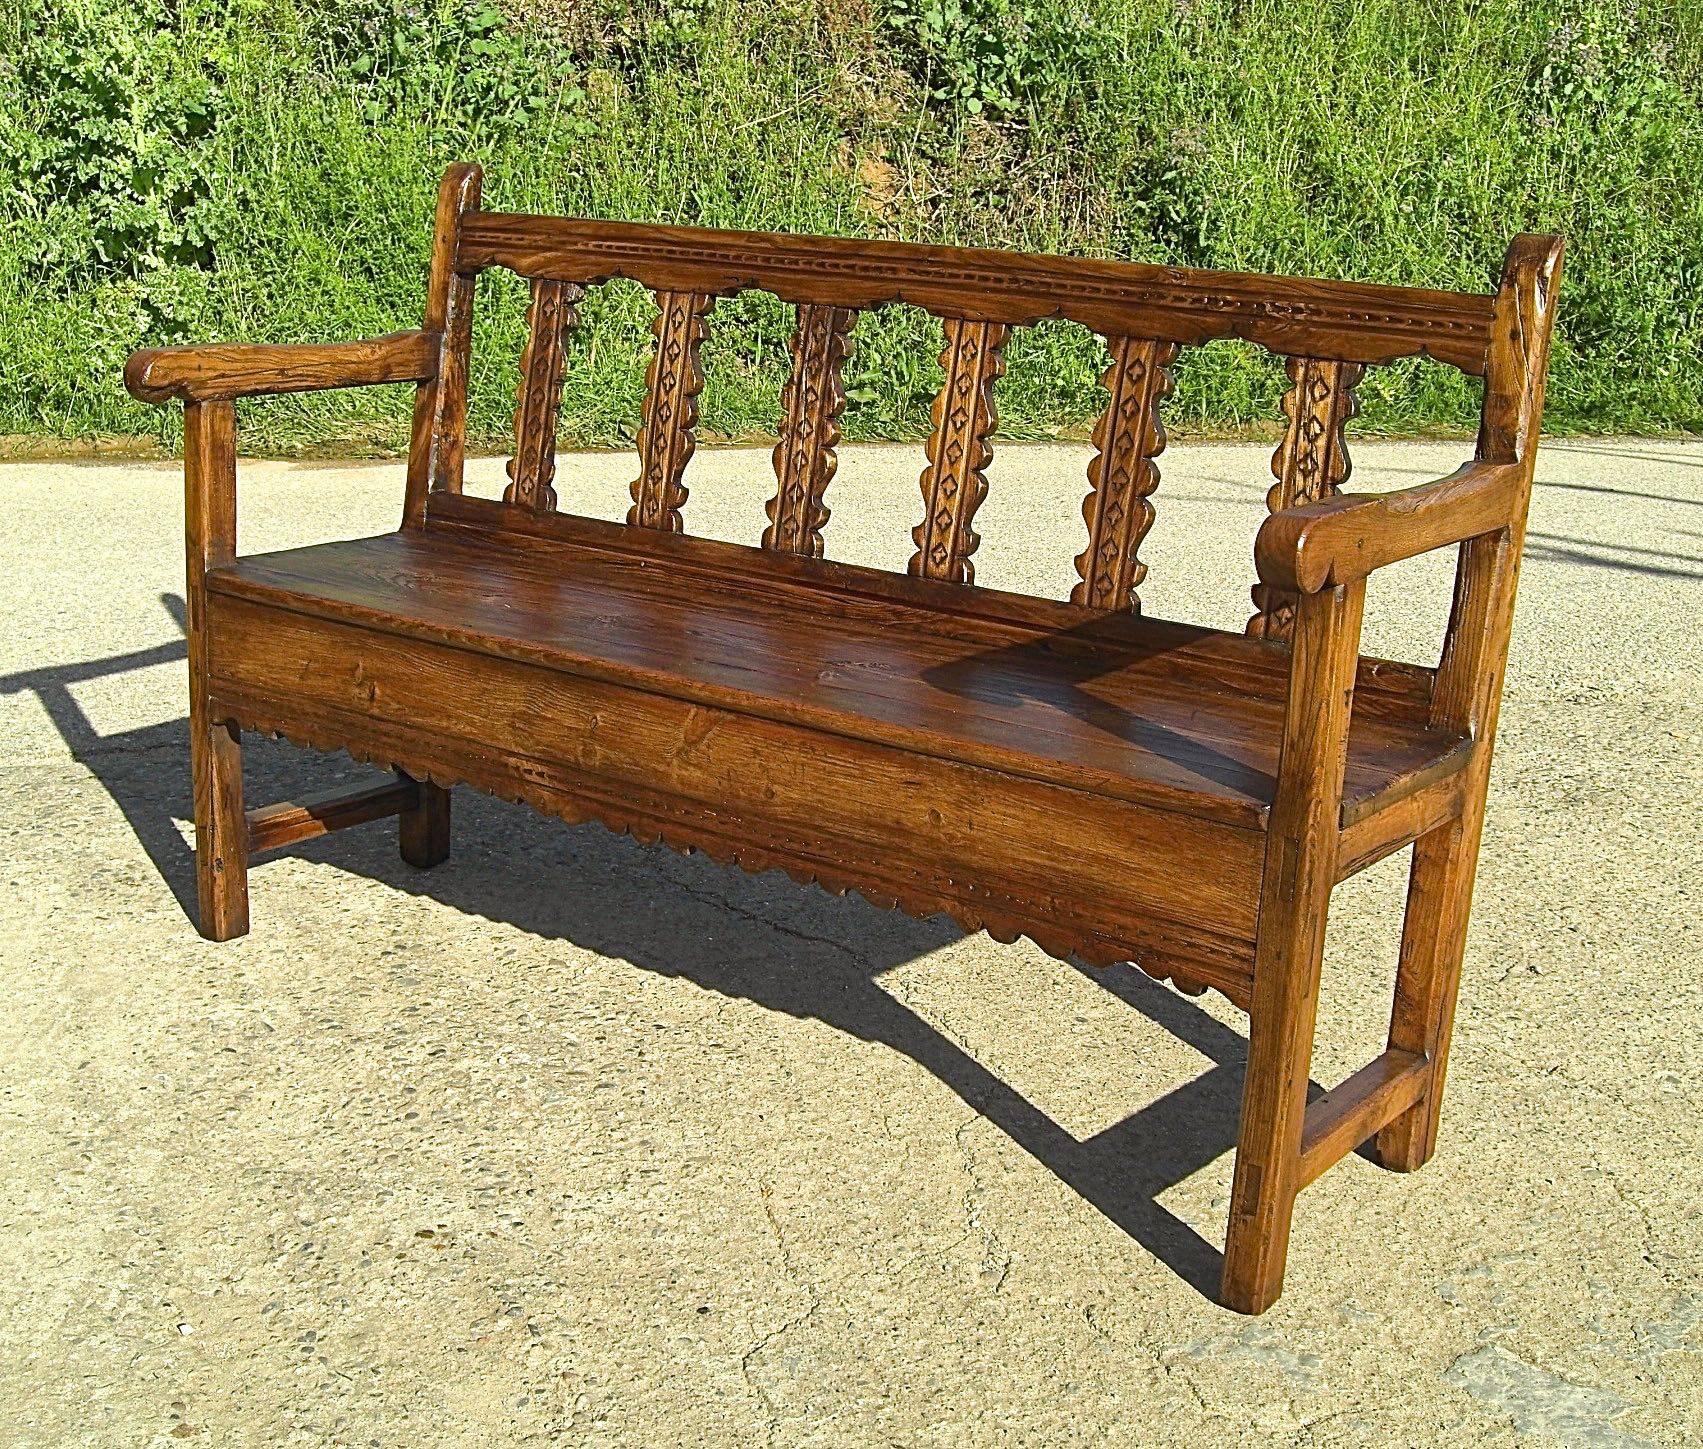 With phenomenal original patina, this matched pair of pine and elm benches was found in the Tena Valley in the Aragonese Pyrenees (province of Huesca, Spain). 

Crafted in the late 18th century, the pitched backs, splats, legs and arms of these